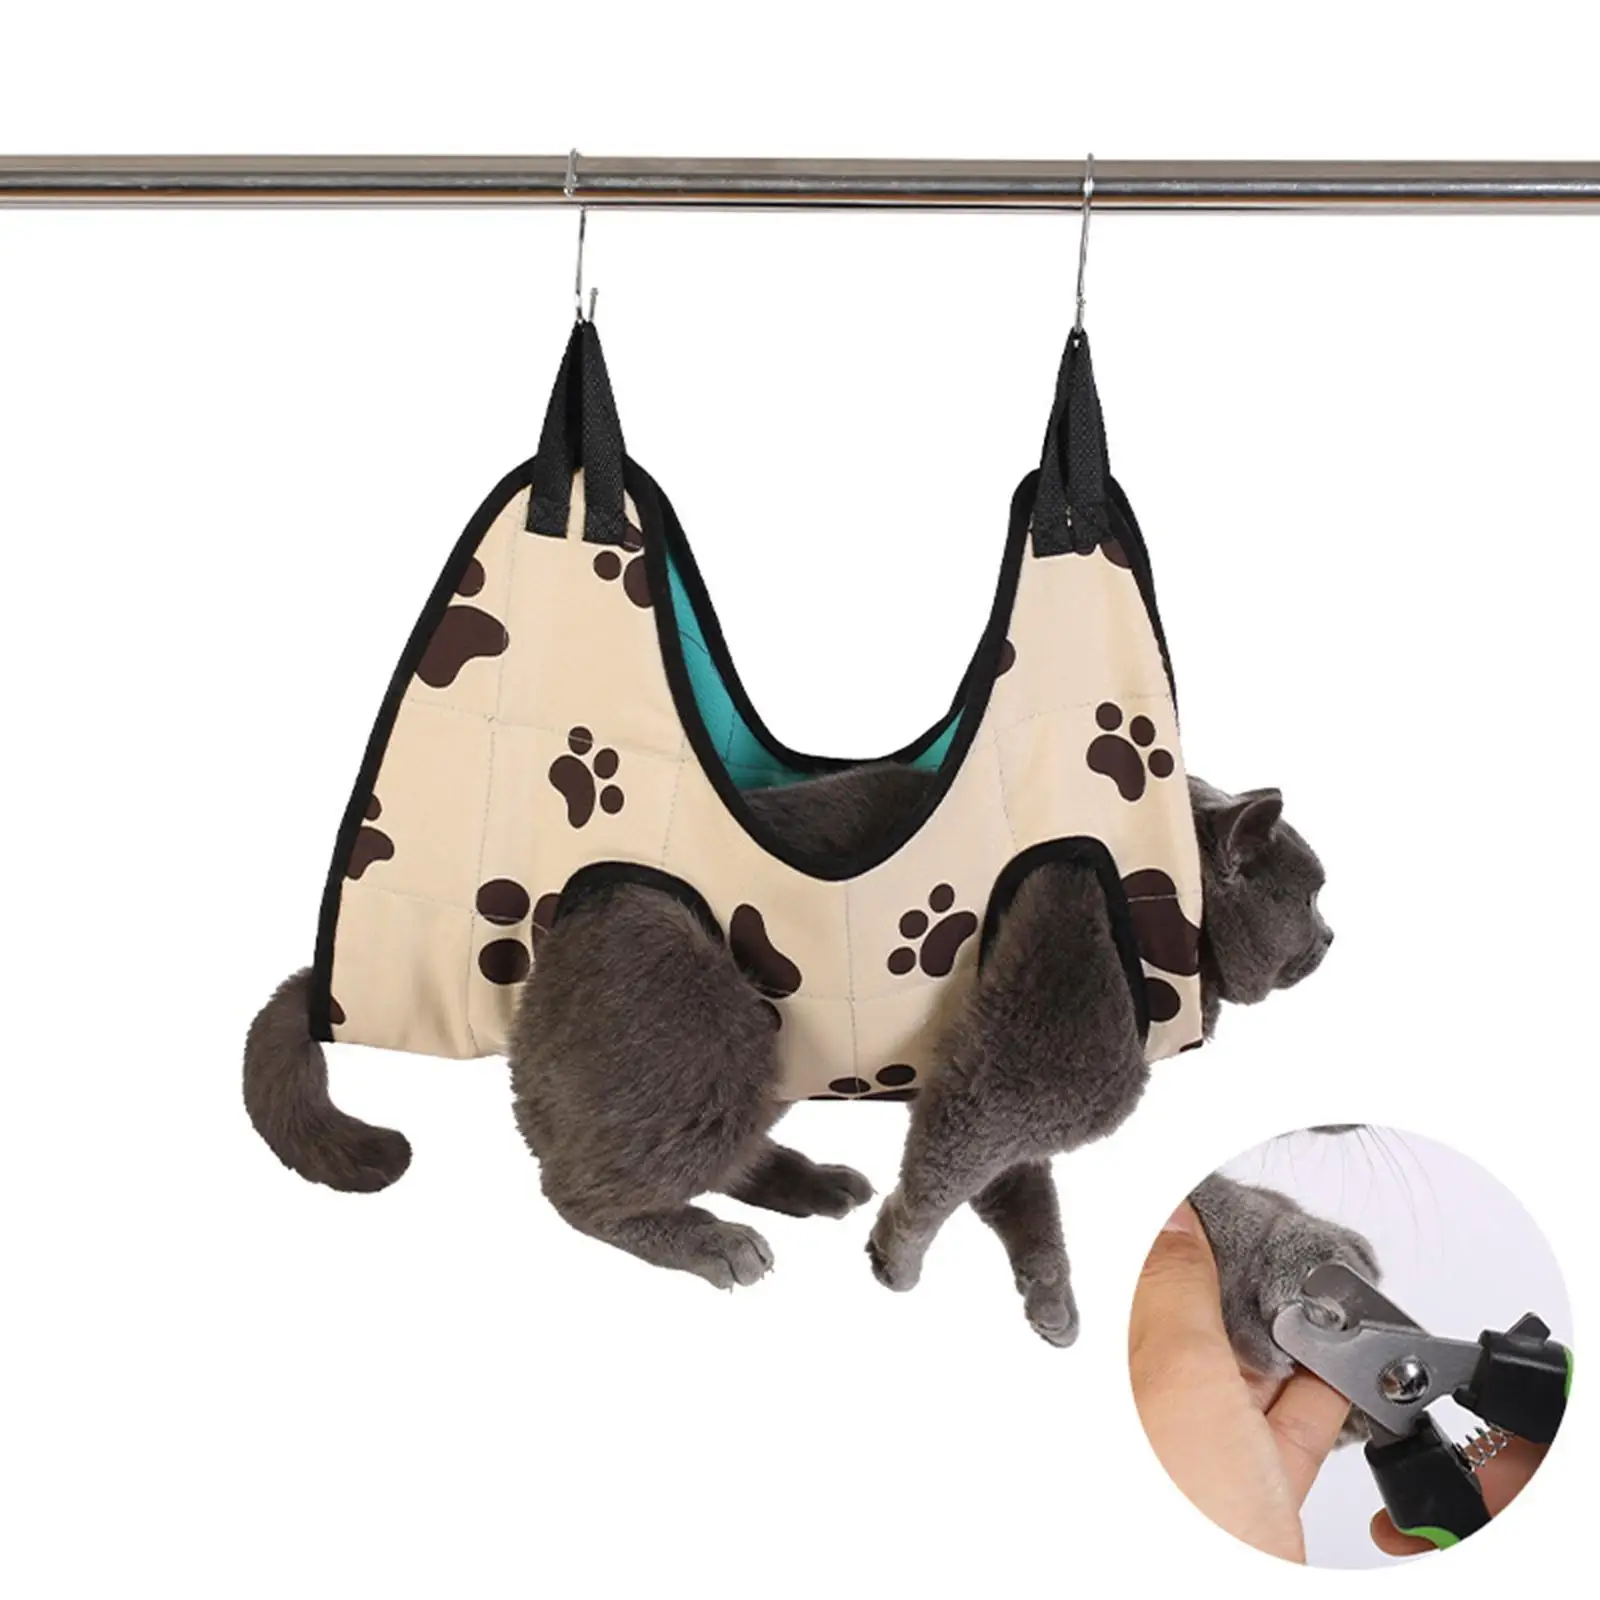 Portable Dog Grooming Hammock Restraint Bag Multi Functional Hammock Helper for Bathing Puppy Nails Clipping Assistant Examining